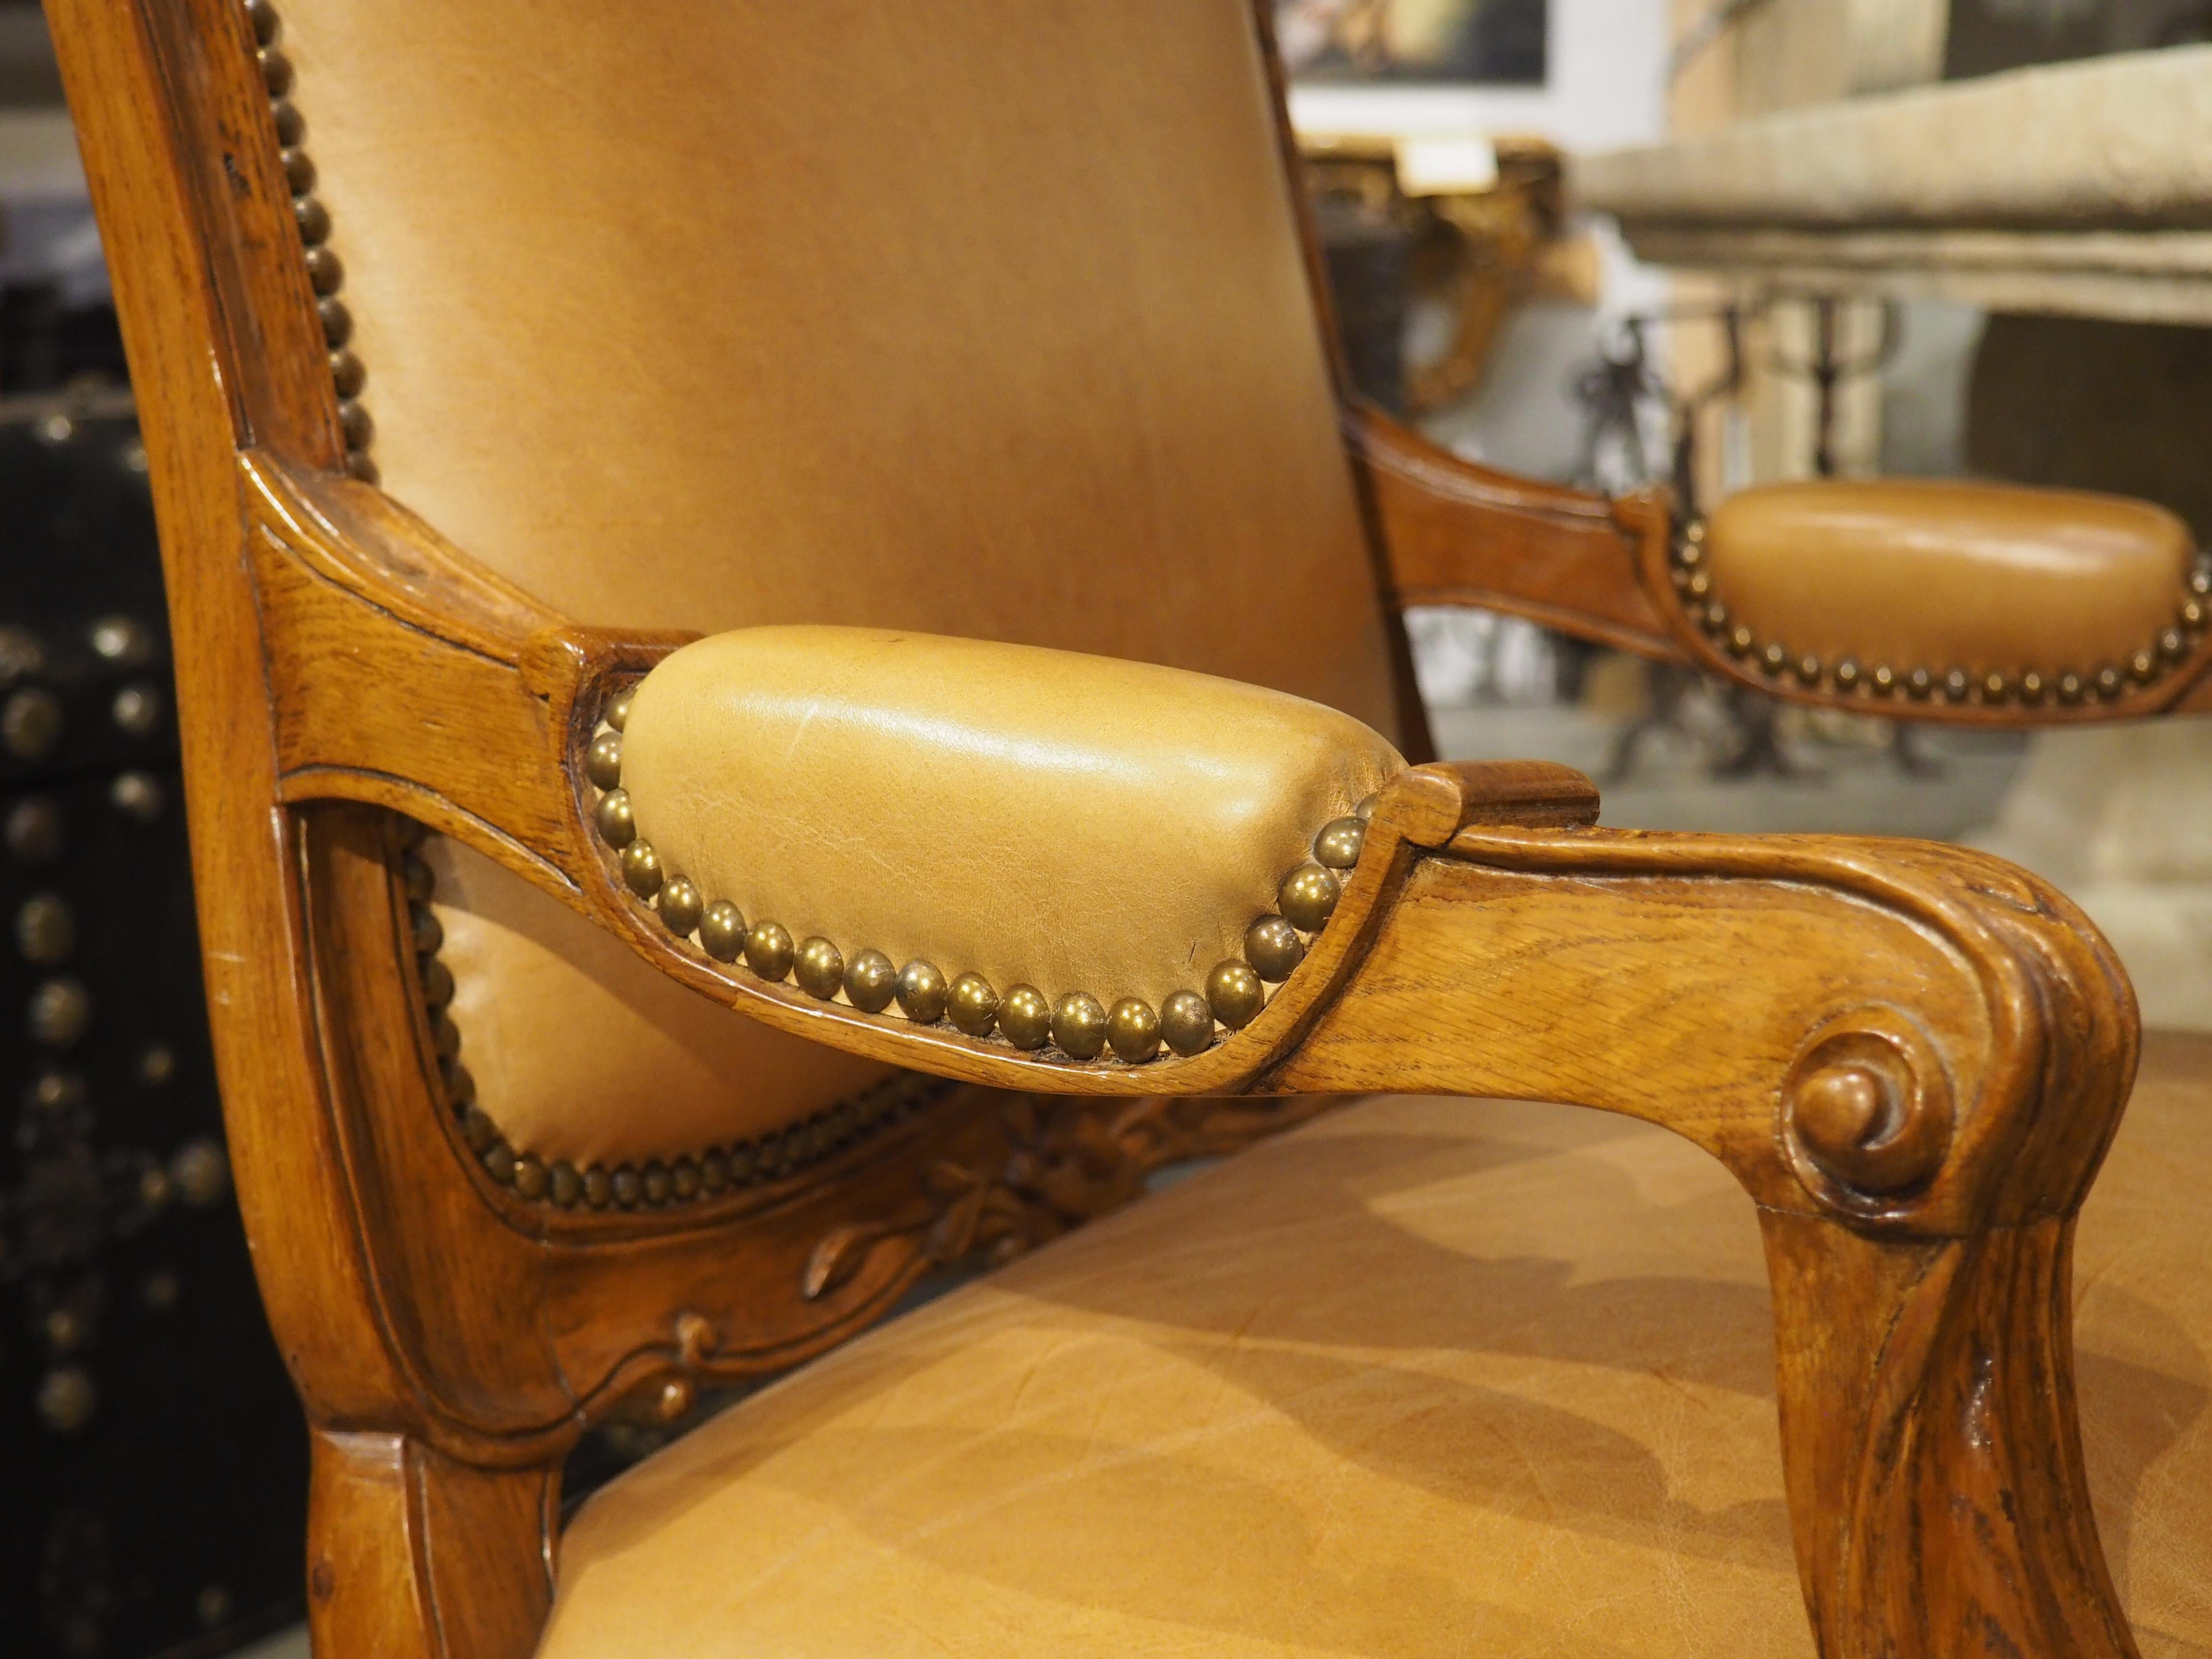 Pair of French Carved Regence Style Armchairs with Leather Upholstery, C. 1900 For Sale 8